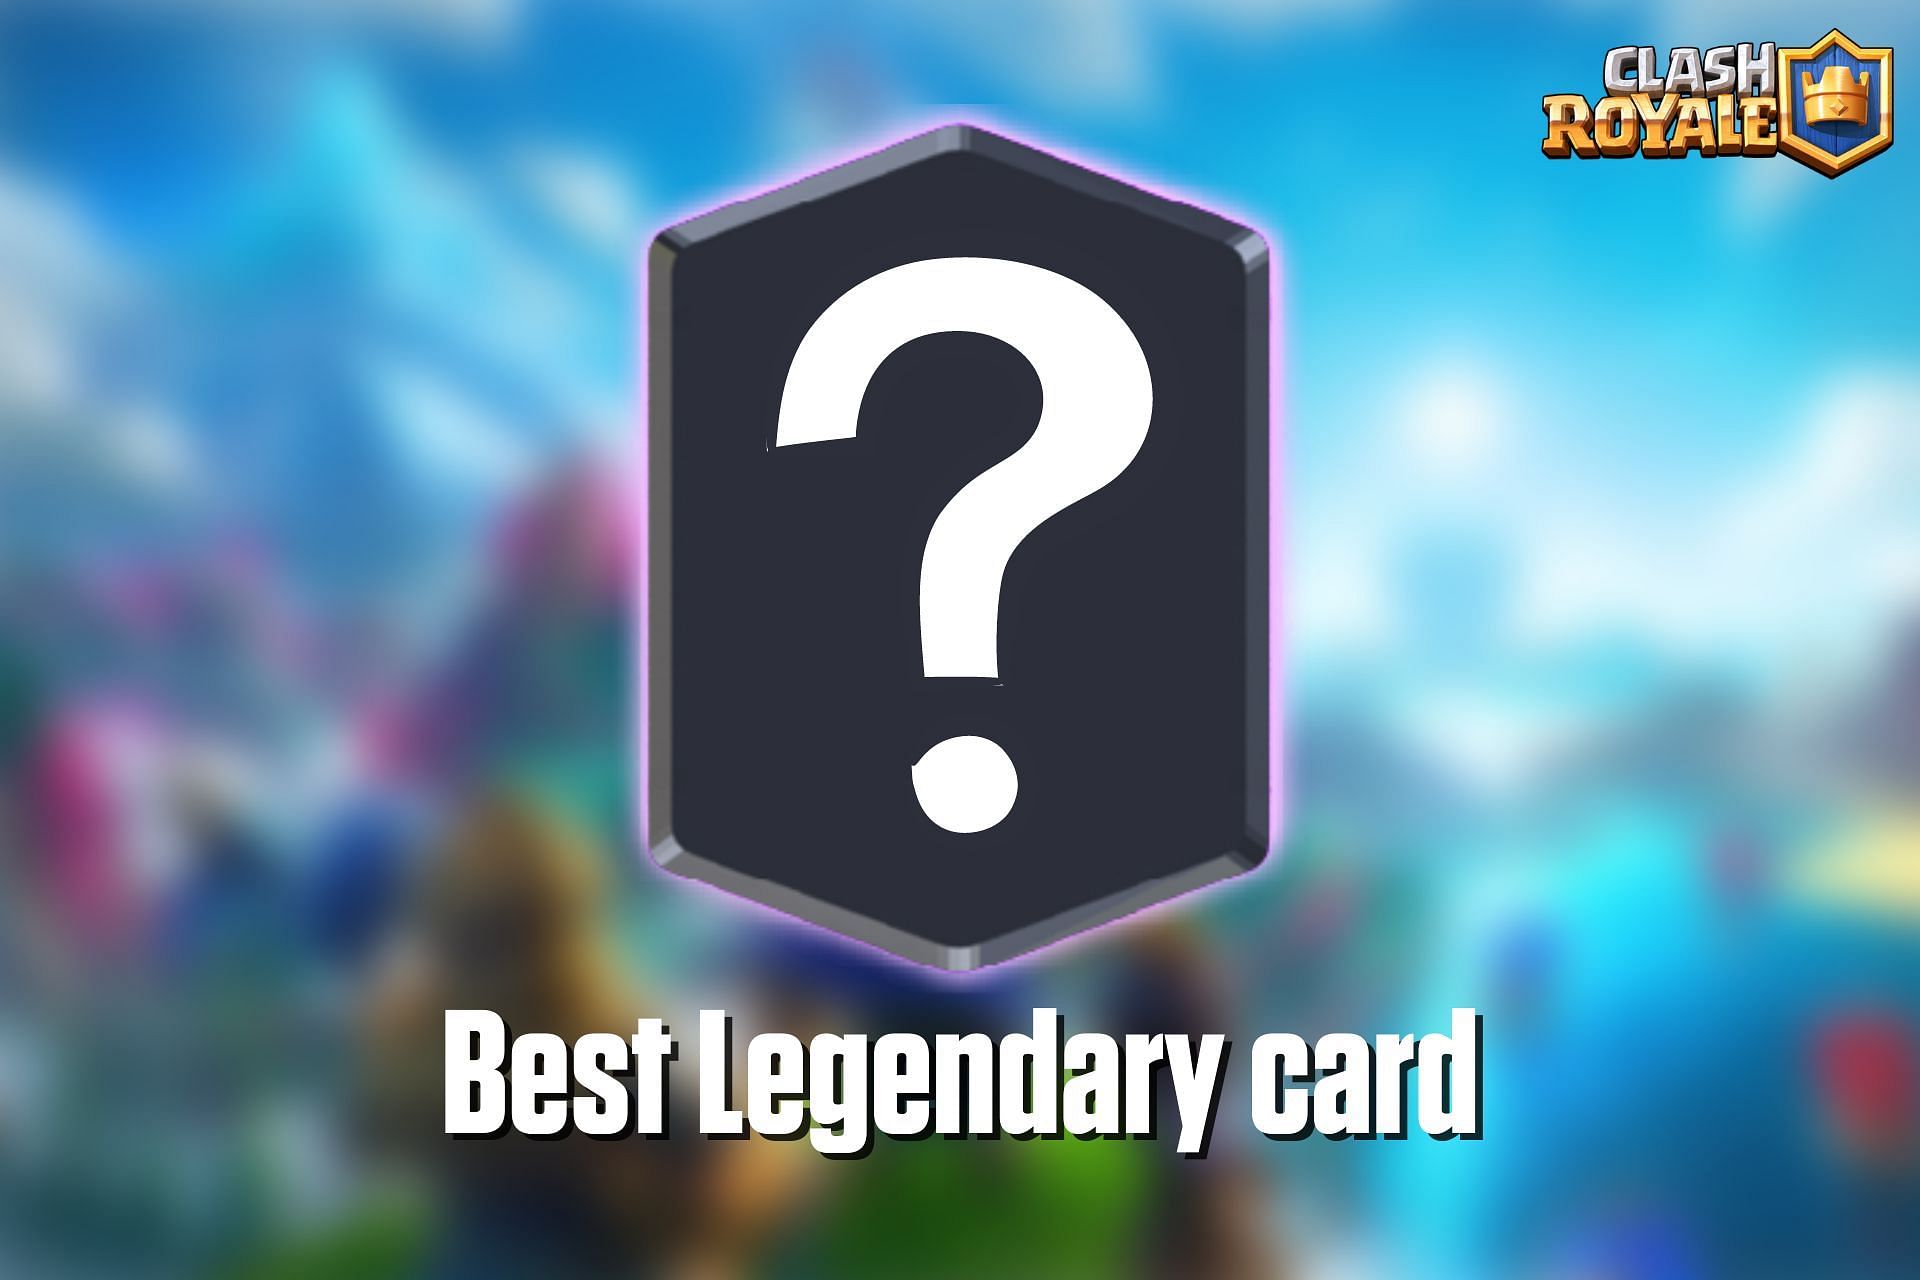 Which is the best Legendary card in Clash Royale?